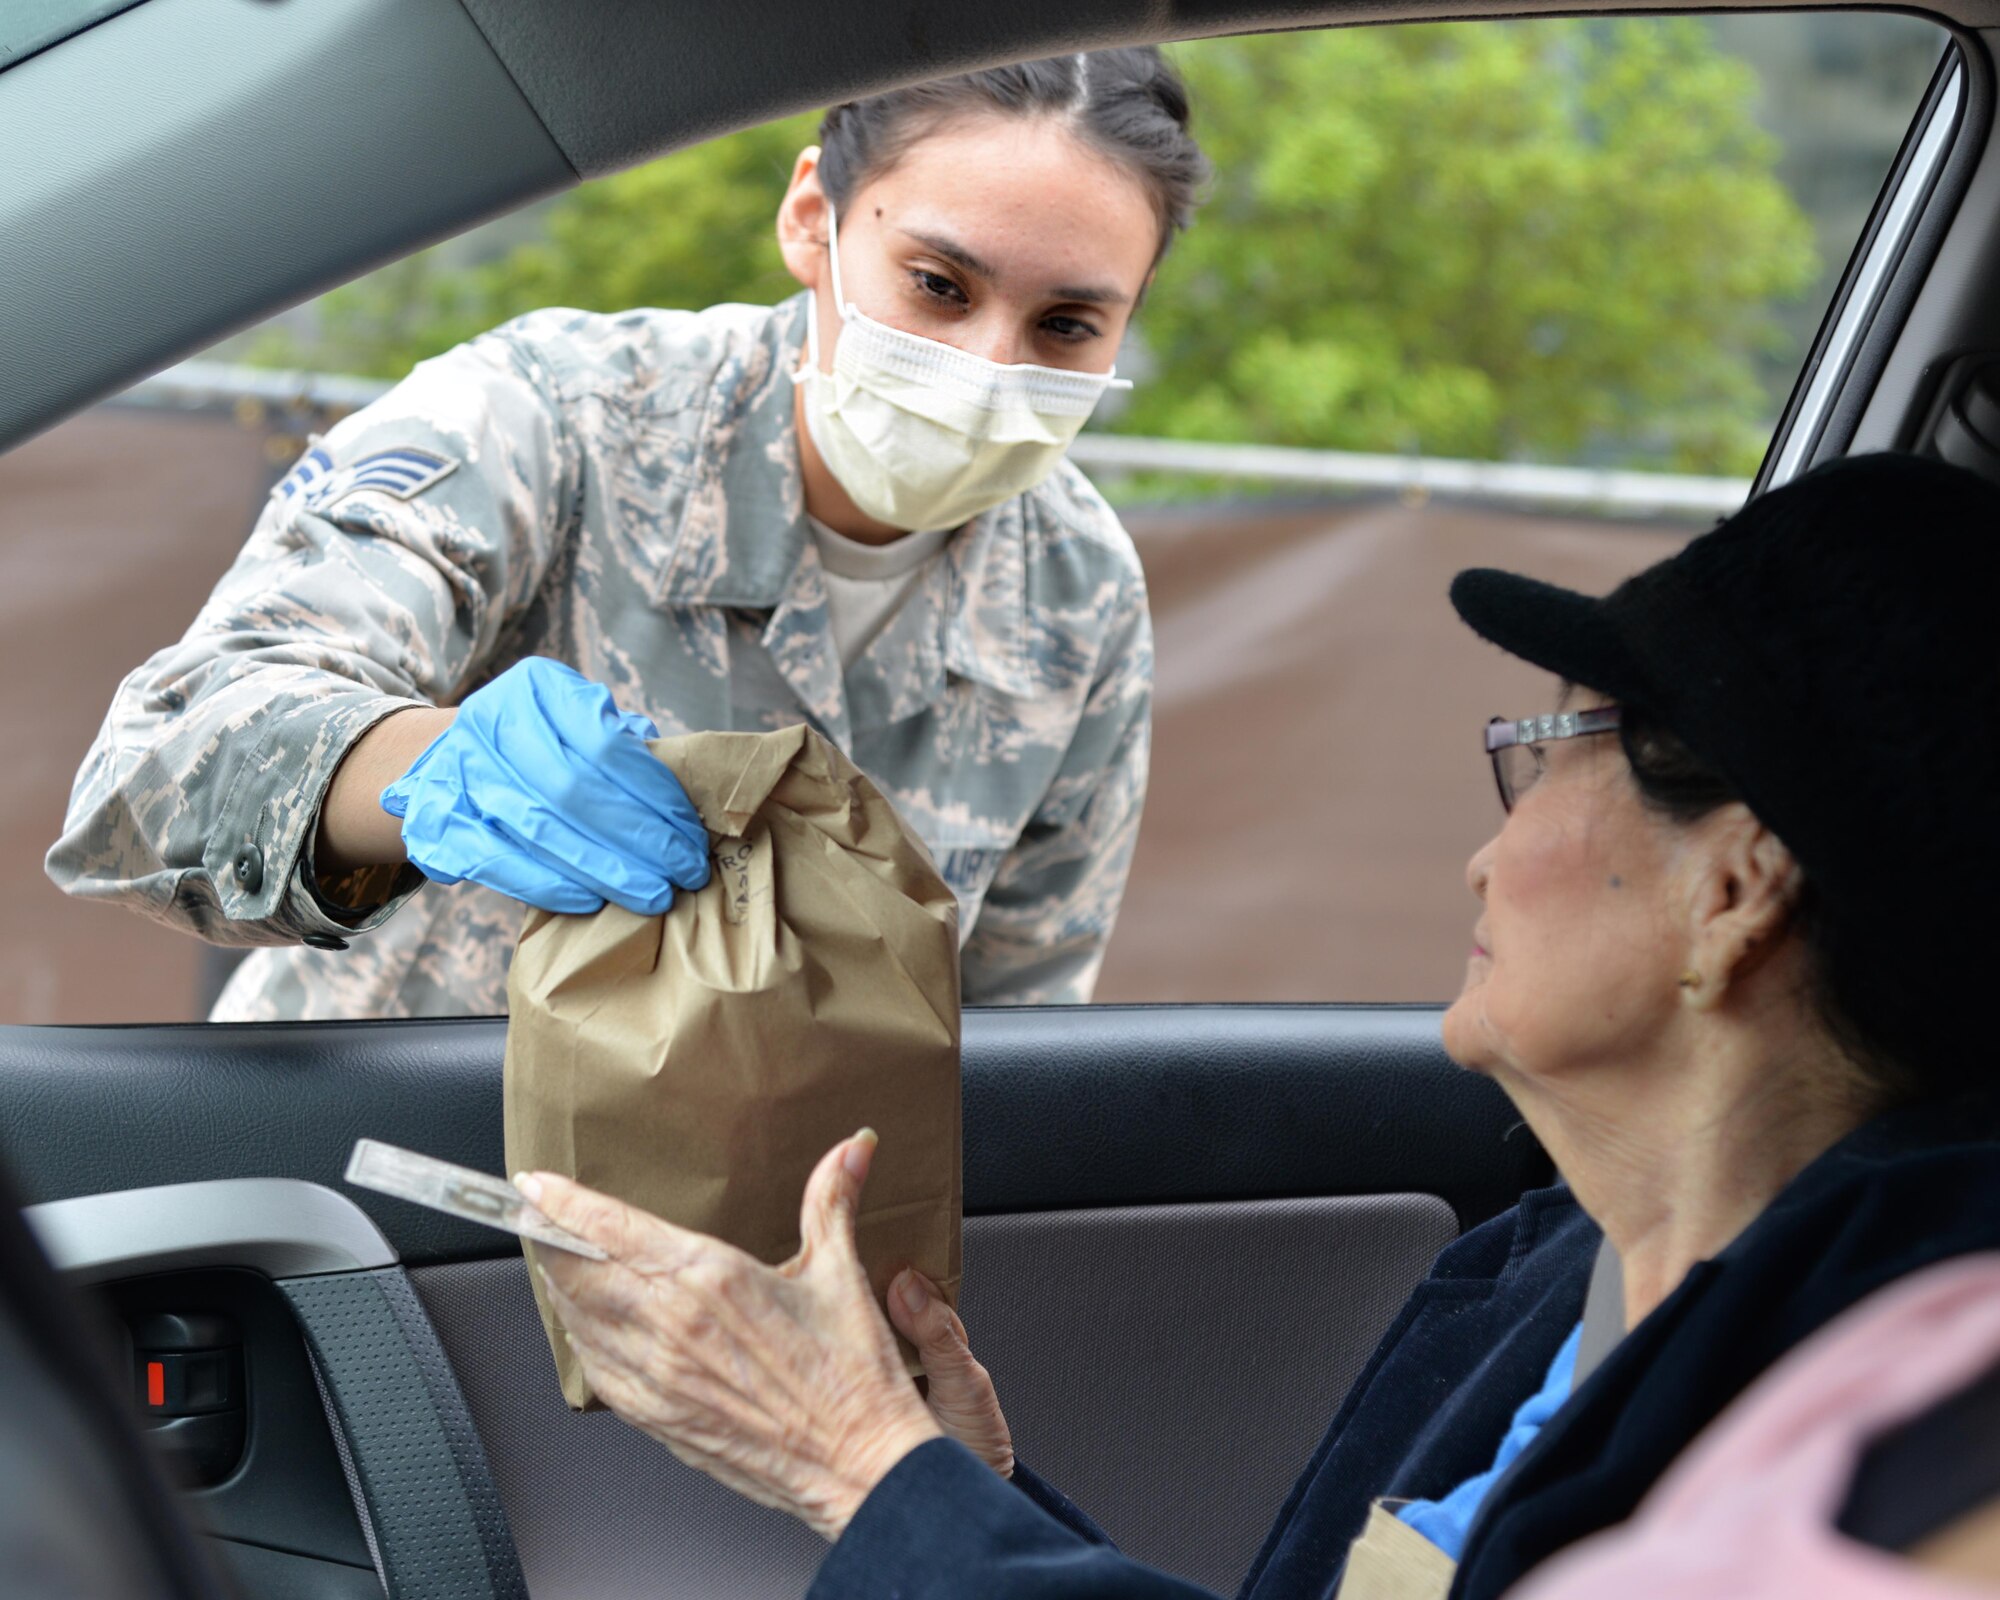 U.S. Air Force Senior Airman Reanne Kohlus, a dental technician assigned to the 59th Dental Group, hands a prescription over to a beneficiary at Joint Base San Antonio- Lackland, Texas, March 30, 2020. The 59th Medical Wing is providing curbside service until further notice in front of the Wilford Hall Ambulatory Surgical Center in support of social distancing recommendations and to increase efforts to mitigate further spread of the novel coronavirus. (U.S. Air Force photo by Kiley Dougherty)